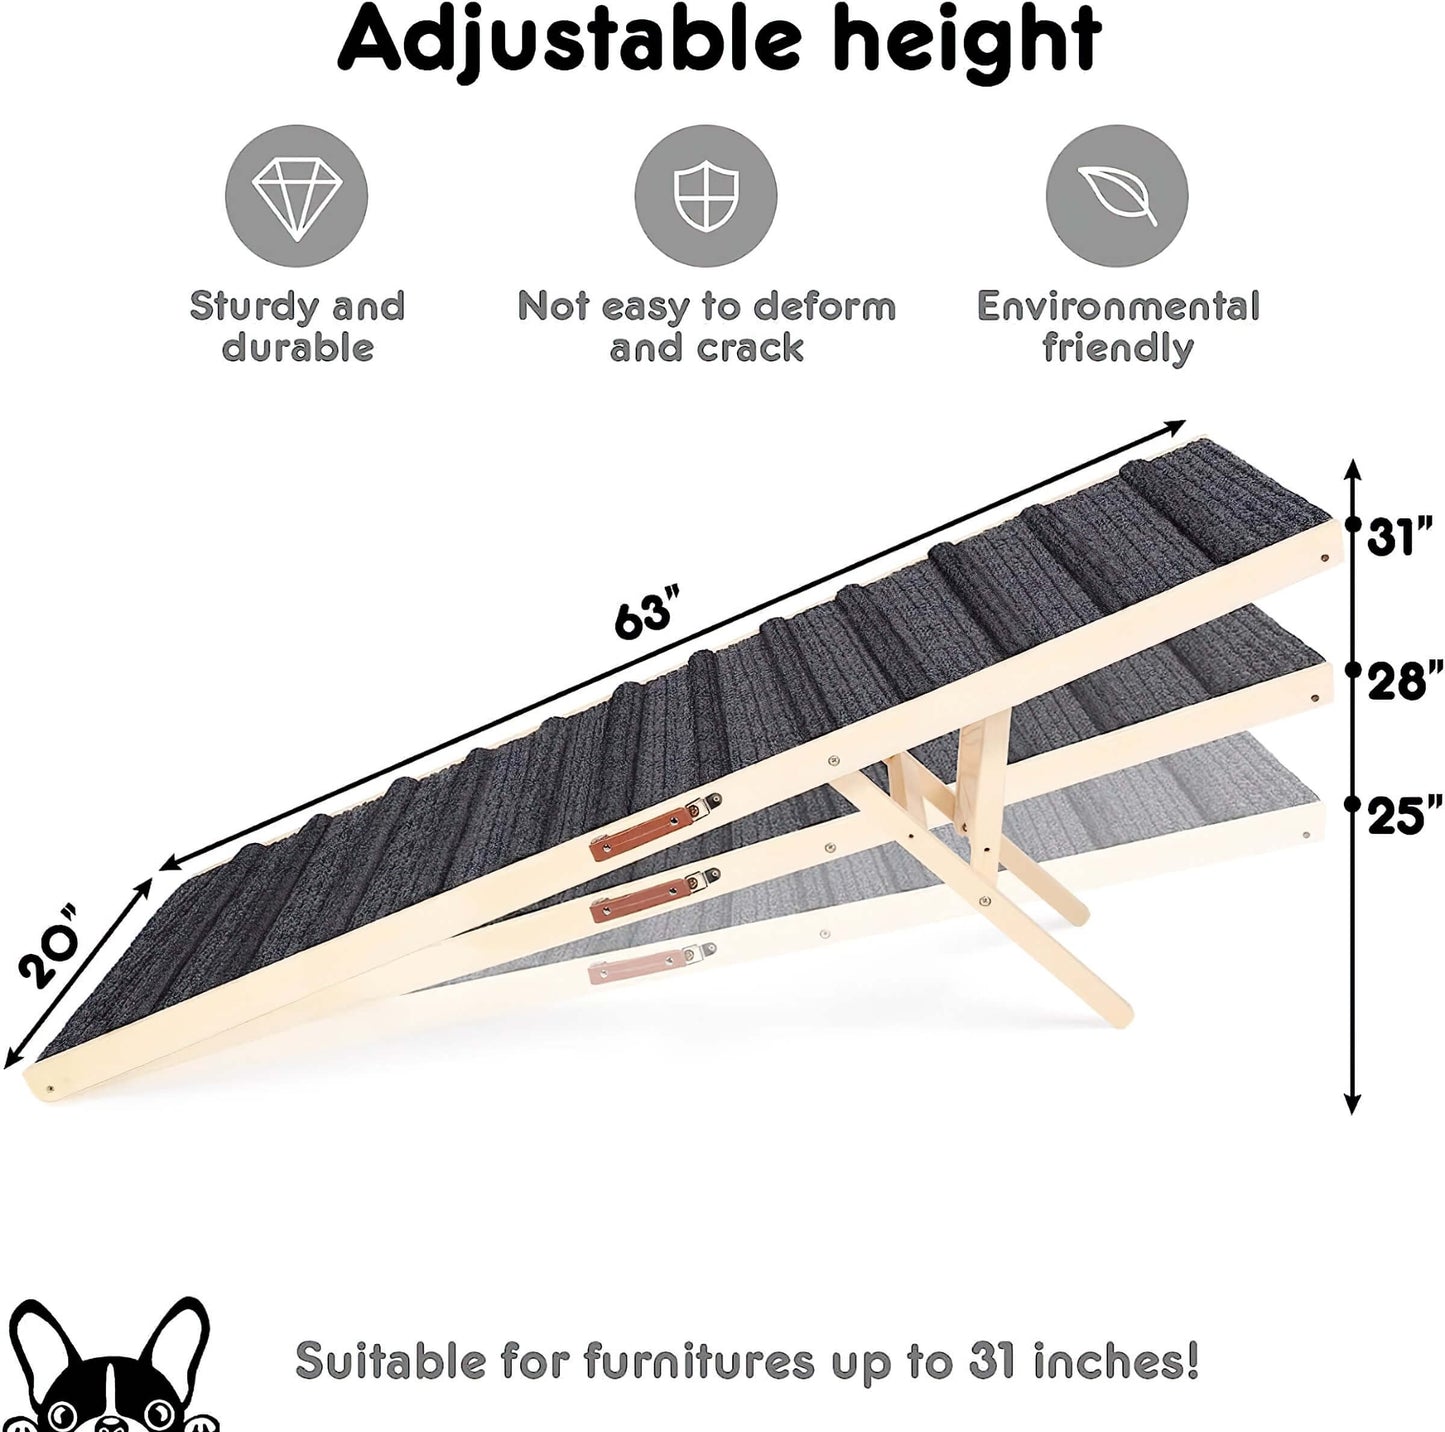 63" x 20" Premium Quality Dog Ramp for Bed and Car Heavy Duty Wood Petramp Stairs, Doggy Steps for Tall High Bed